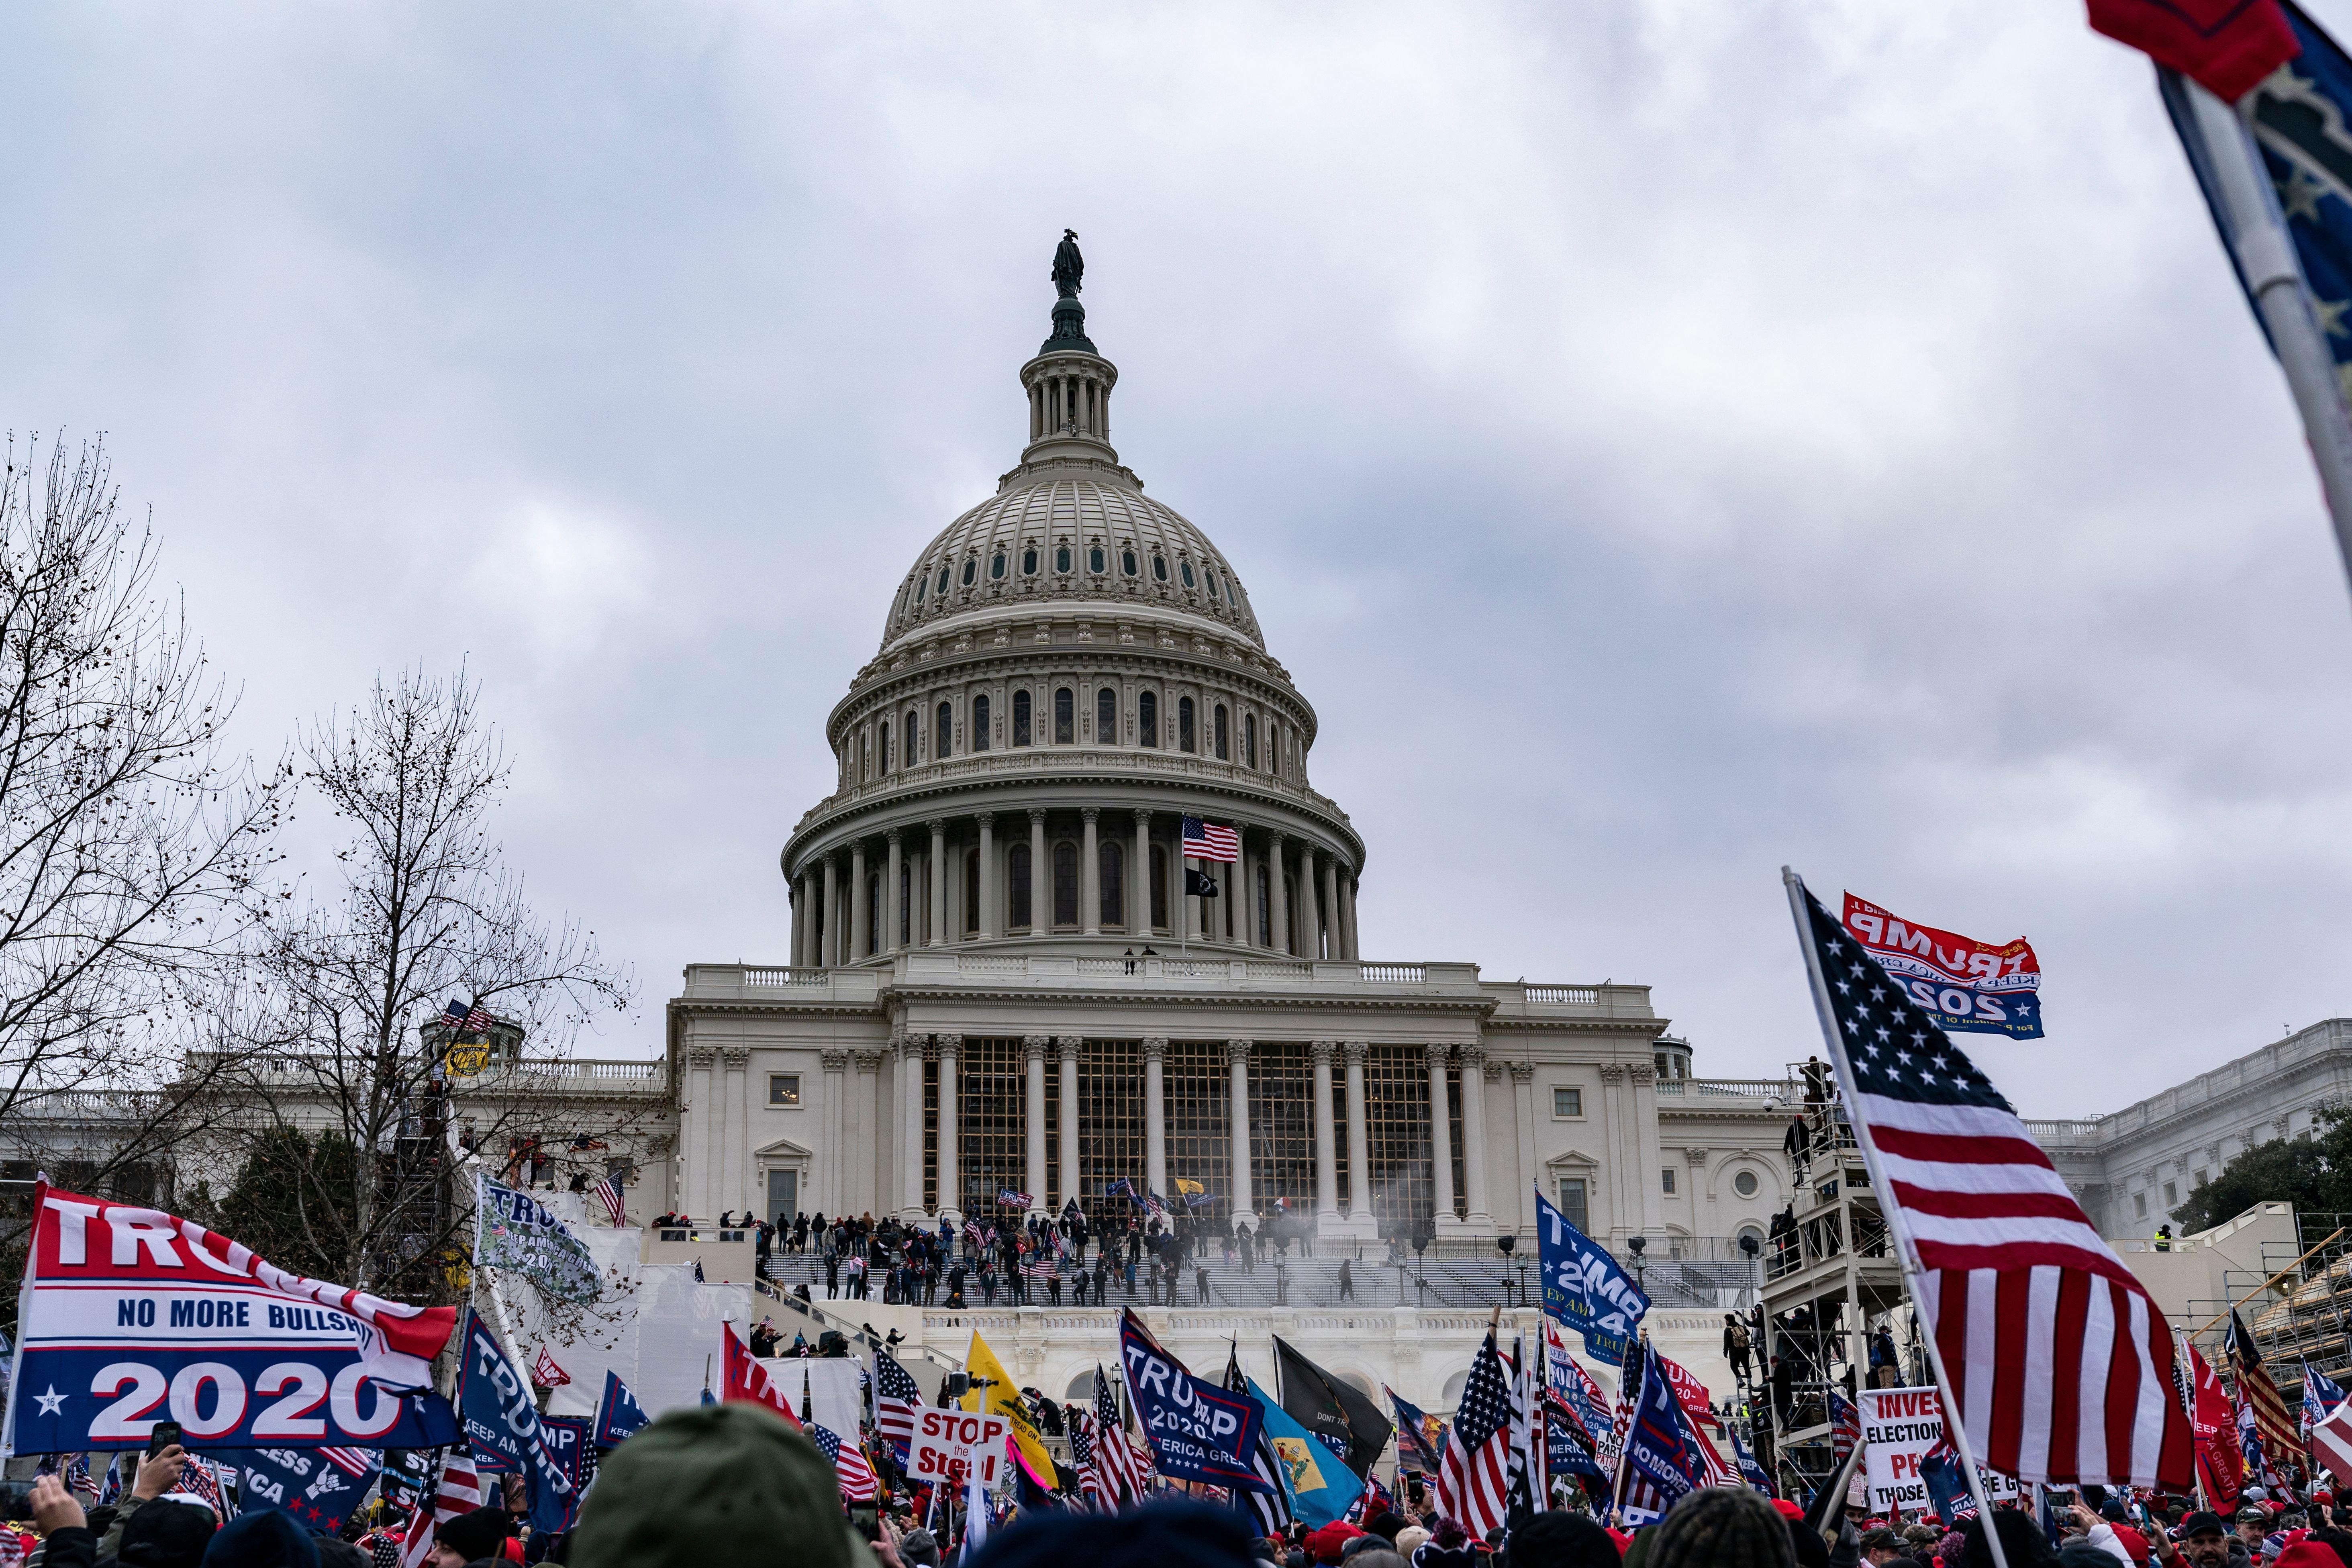 Supporters of US President Donald Trump protest outside the US Capitol on January 6, 2021, in Washington, DC. - Demonstrators breeched security and entered the Capitol as Congress debated the a 2020 presidential election Electoral Vote Certification. (Photo by ALEX EDELMAN / AFP) (Photo by ALEX EDELMAN/AFP via Getty Images)